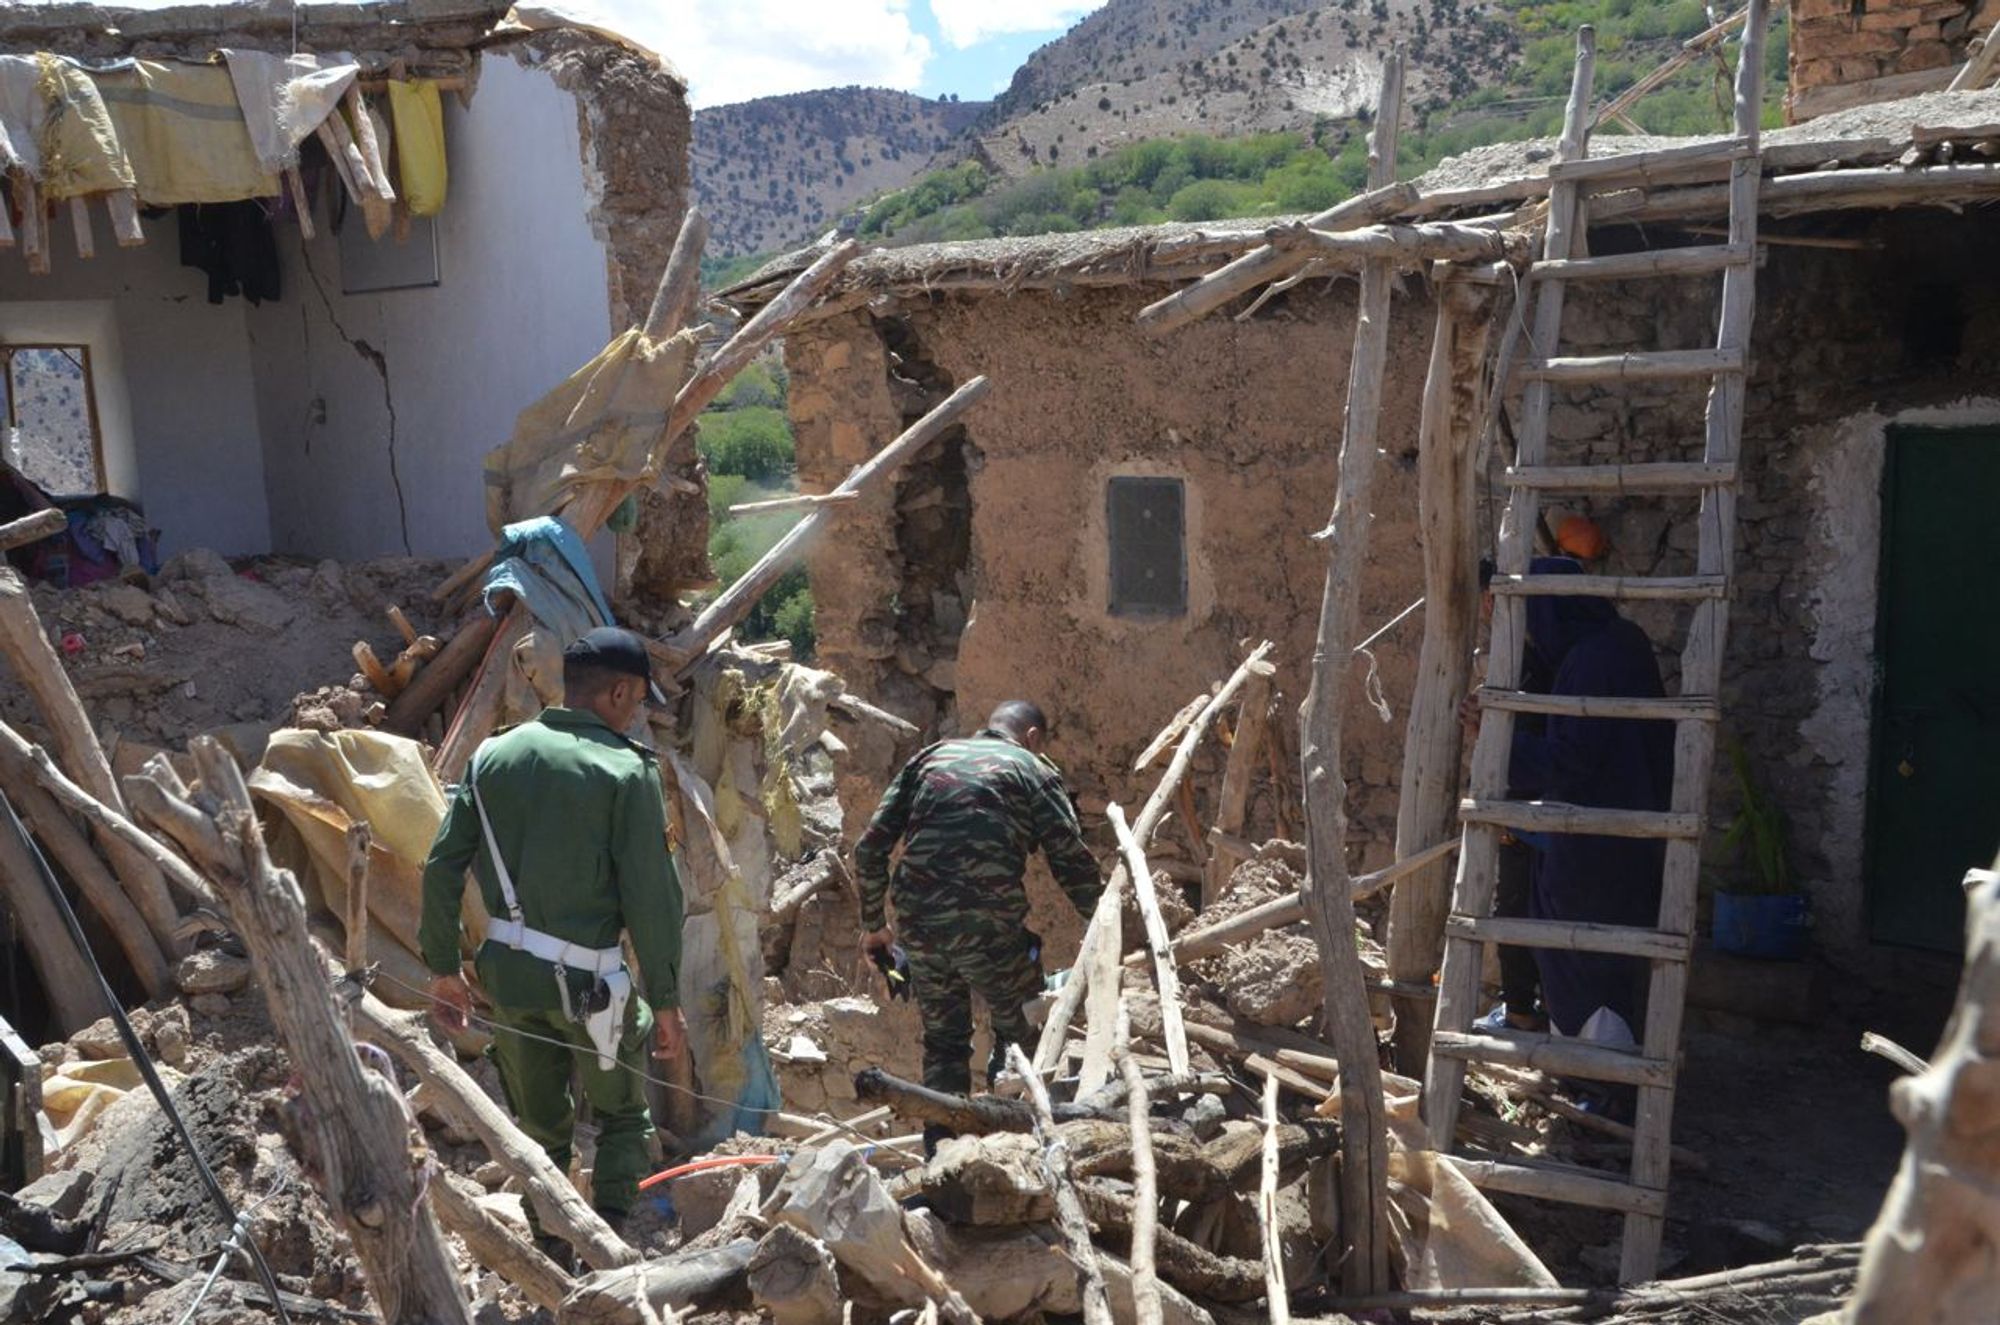 Two military personnel amid walking through rubble and partially collapsed house.